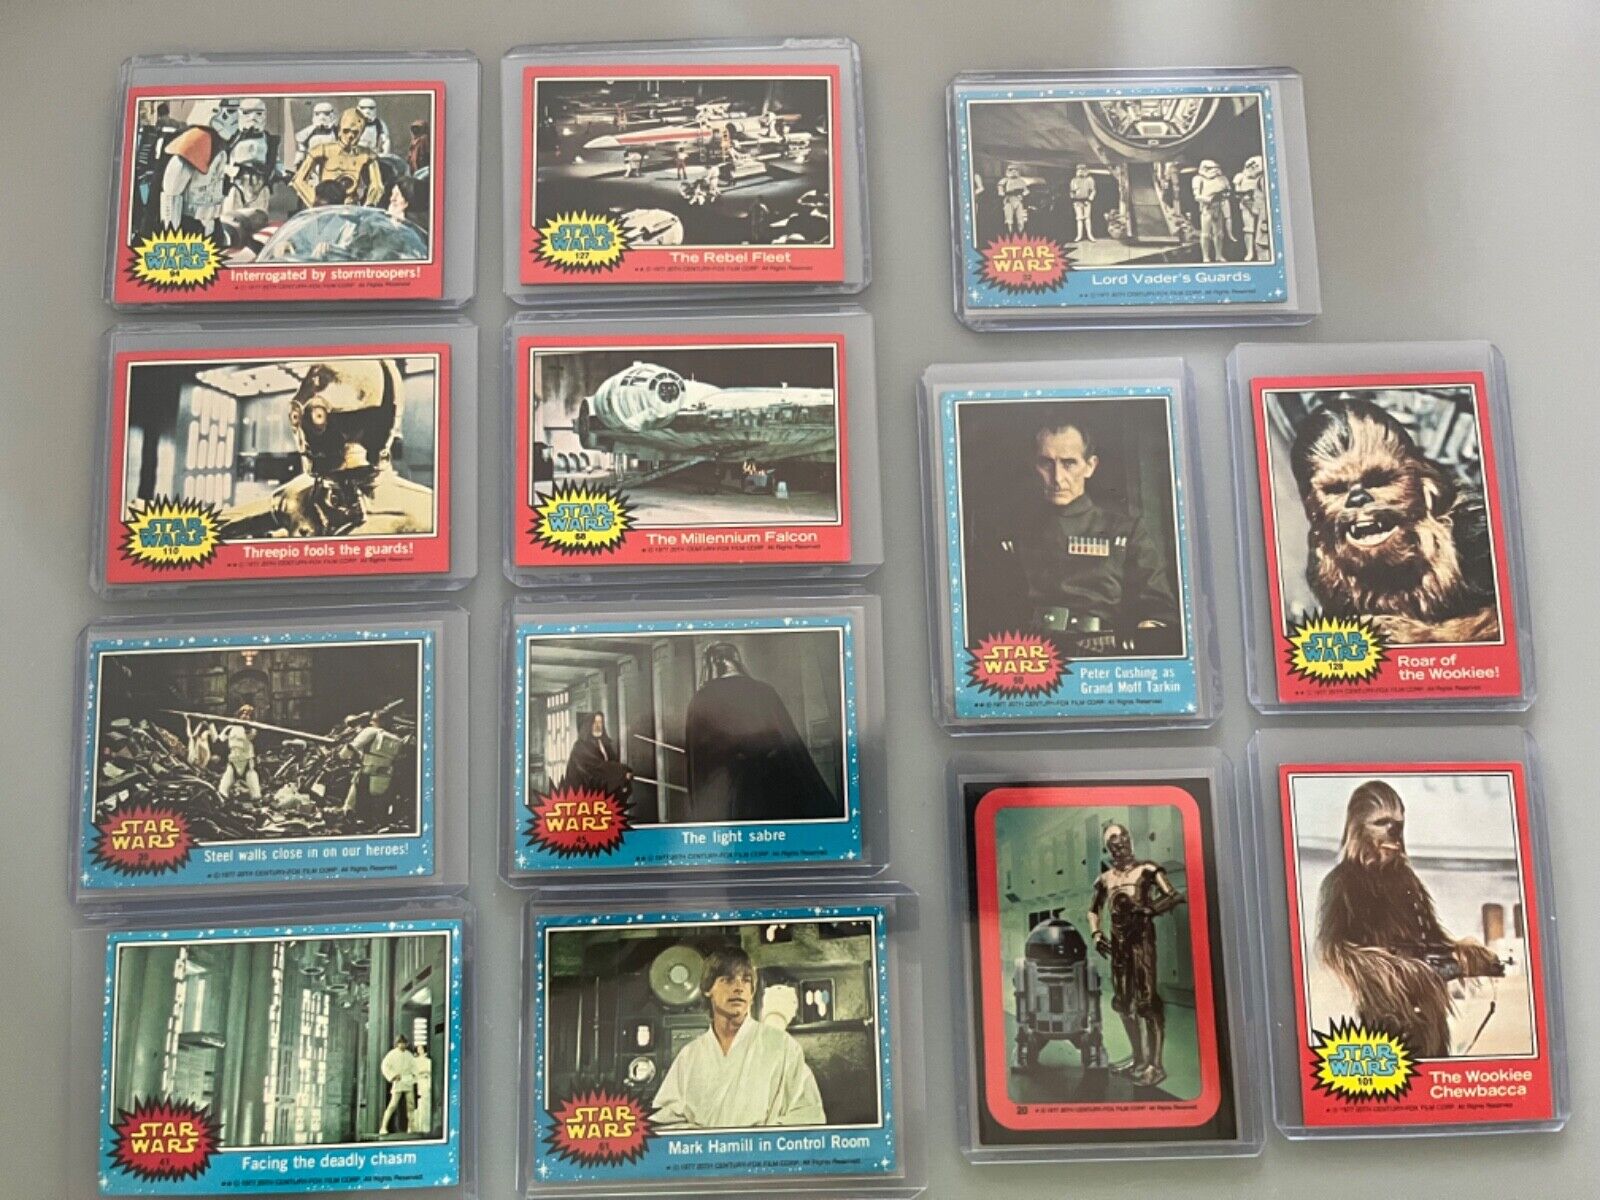 1977 TOPPS STAR WARS SERIES 1&2 Lot OF  12 CARDS - BLUE BORDER. Nice cards